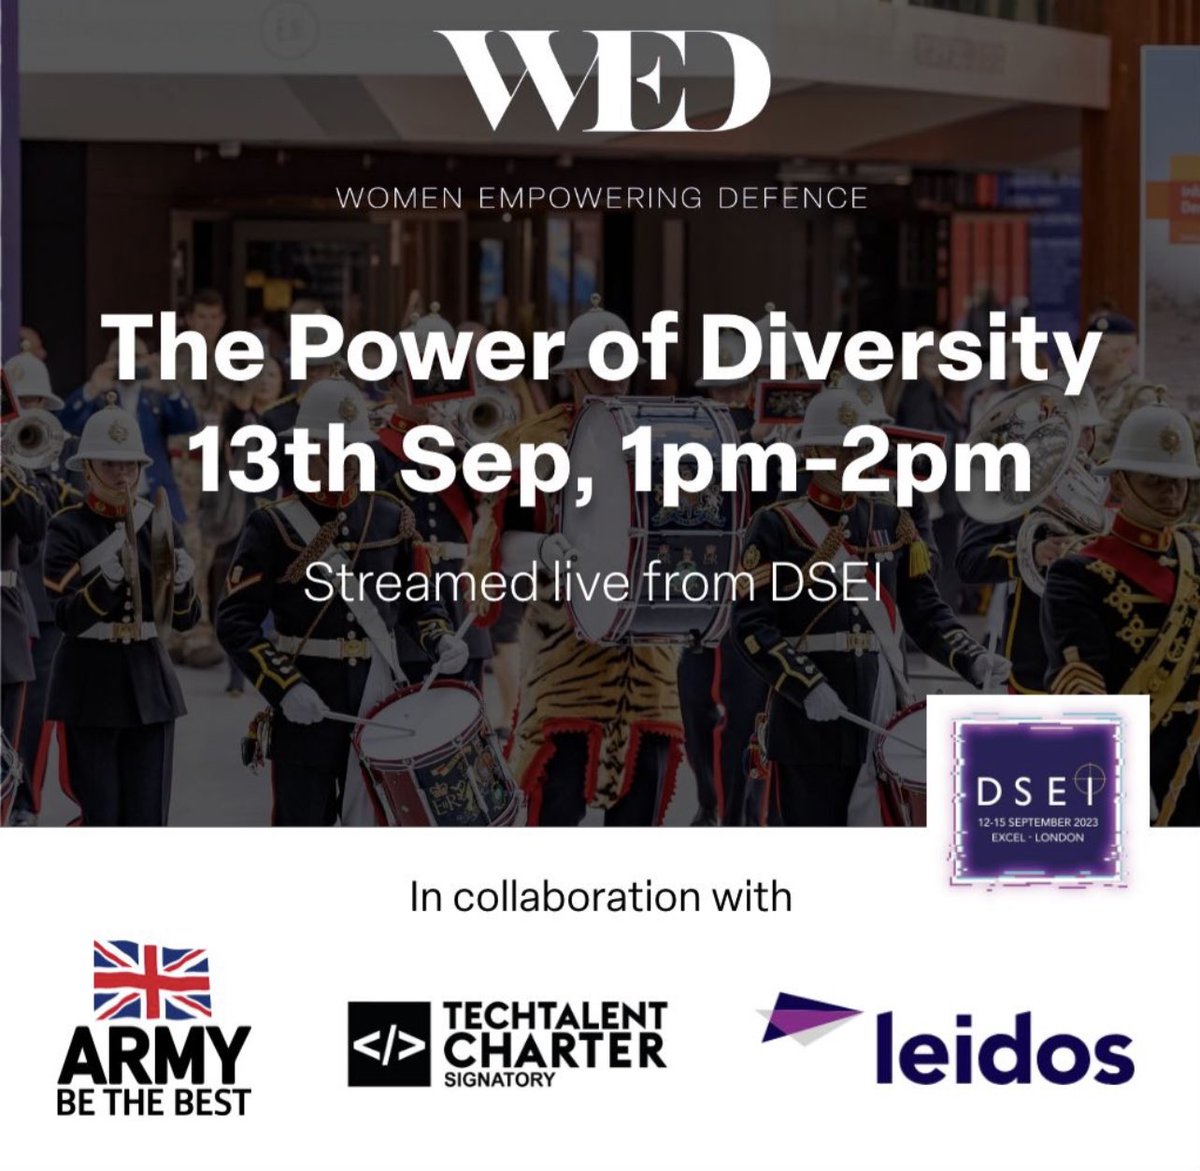 📣 We're thrilled to collaborate with the British Army, @TechCharterUK, and @LeidosInc for our upcoming event: 'The Power of Diversity,' live from #DSEI2023! Be part of the change. Register now! 🔗 [Link in comments] #WomenEmpoweringDefence #DiversityInDefence